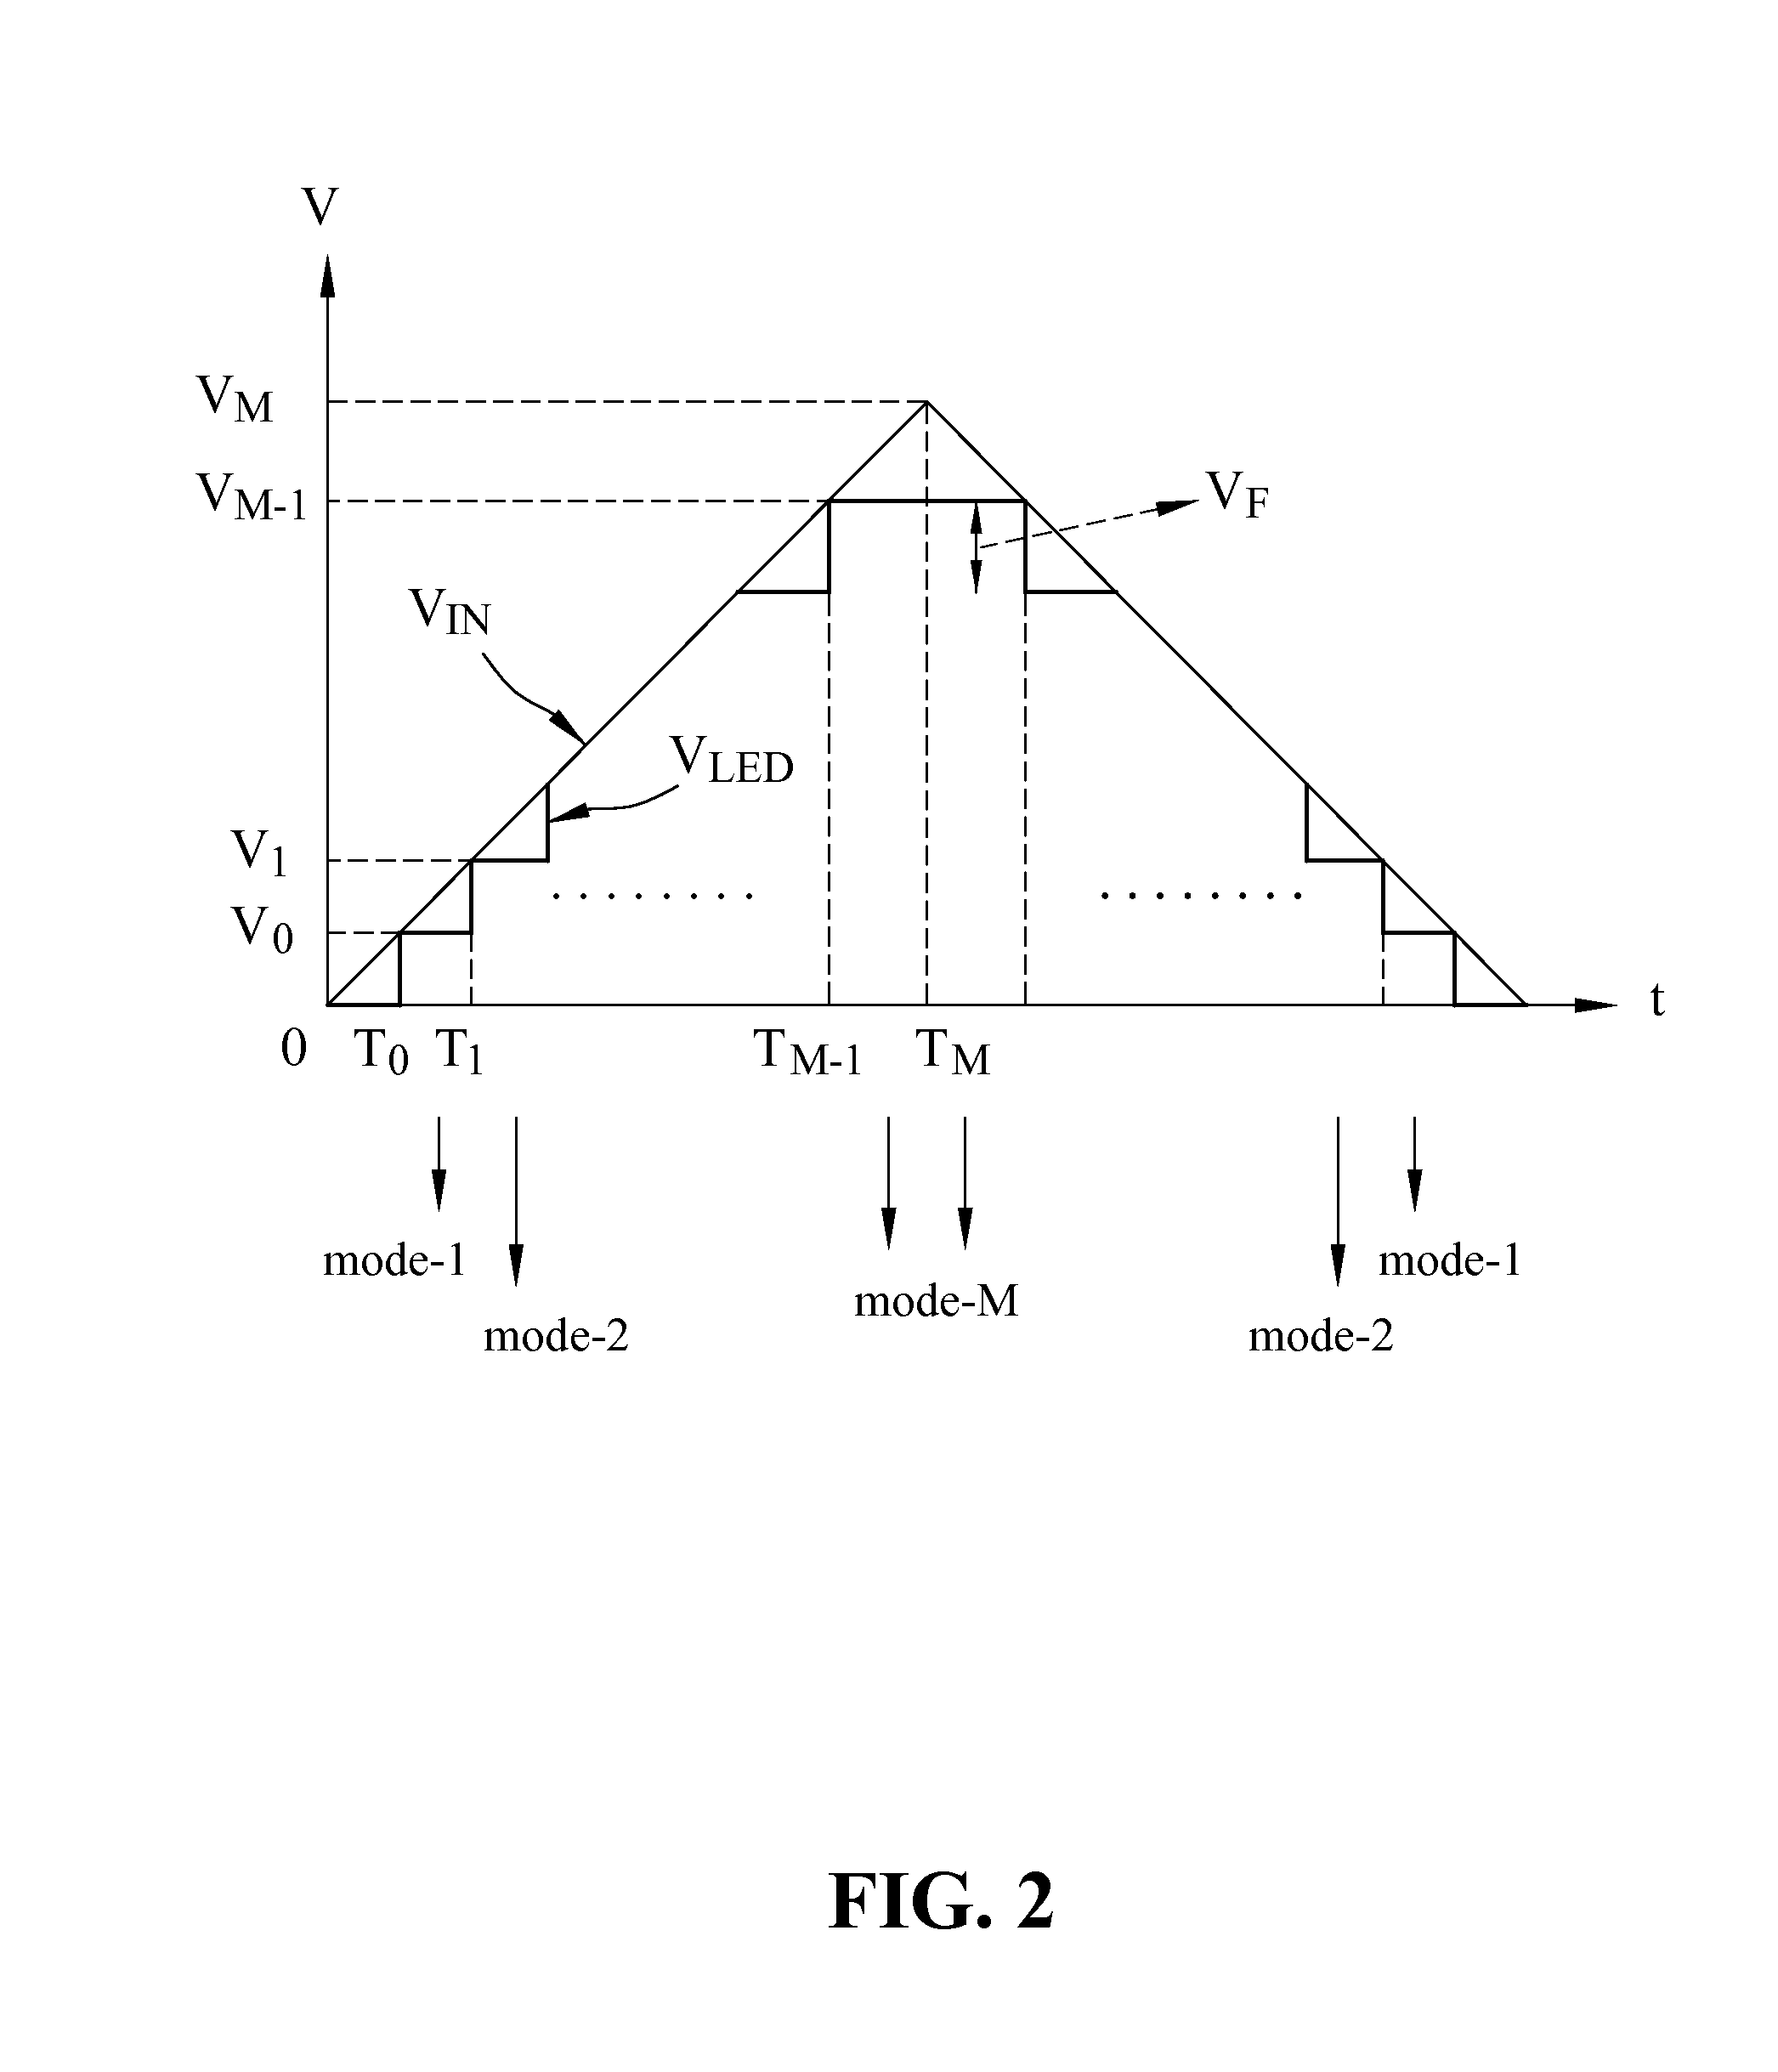 Methods and apparatus for segmenting and driving led-based lighting units